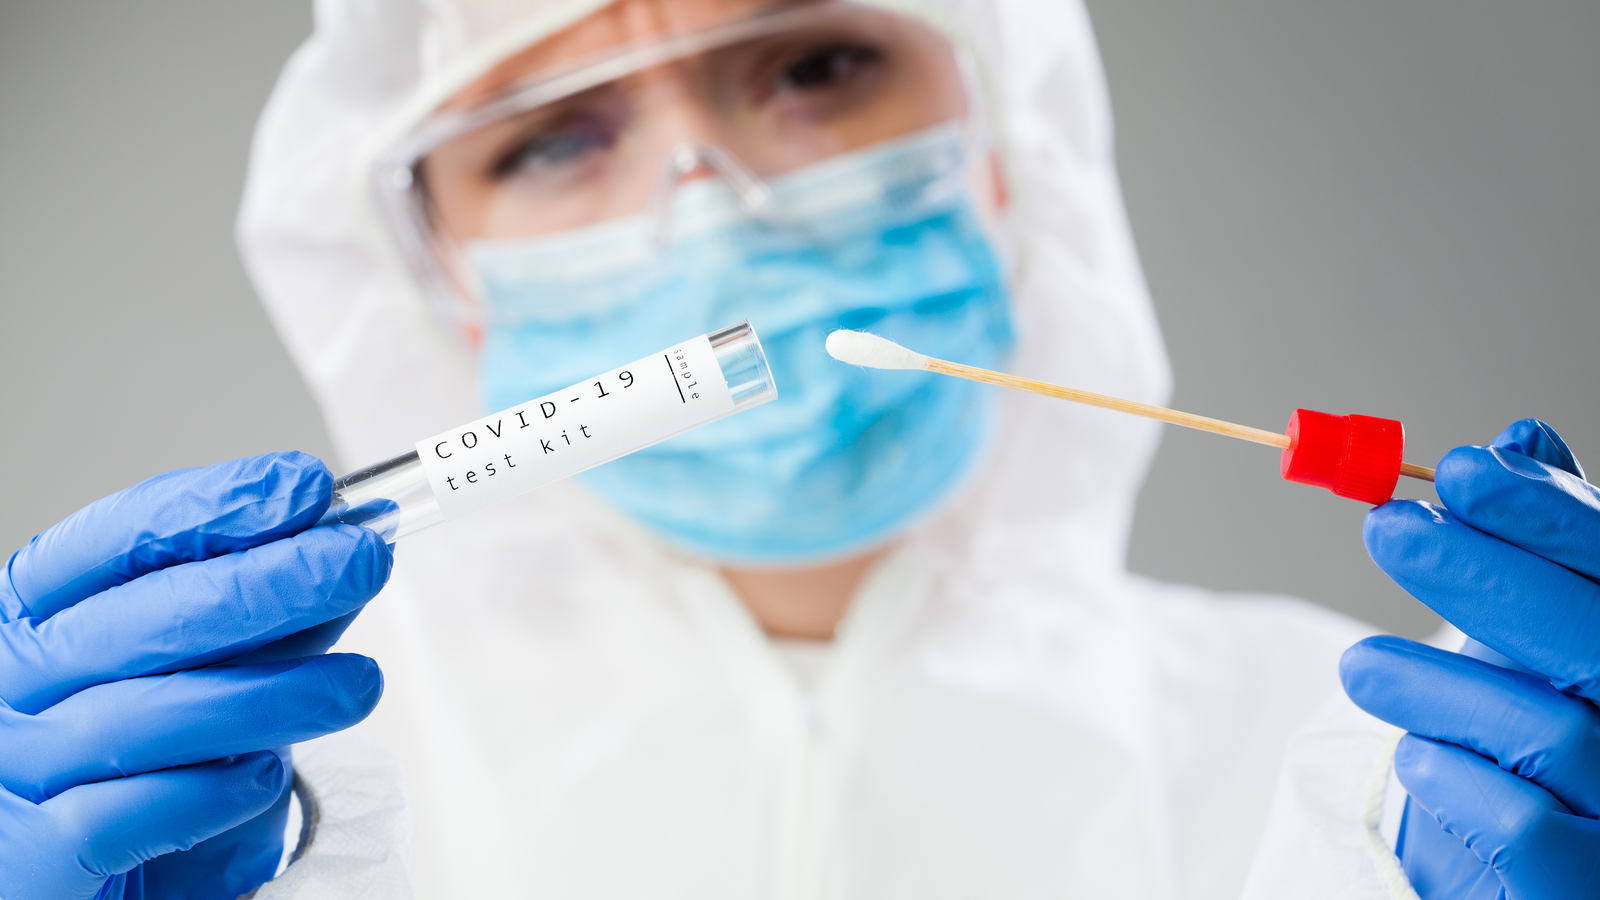 LHDX Stock. A Medical healthcare technologist holding COVID-19 swab collection kit, wearing white PPE protective suit mask gloves, test tube for taking OP NP patient specimen sample,PCR DNA testing protocol process